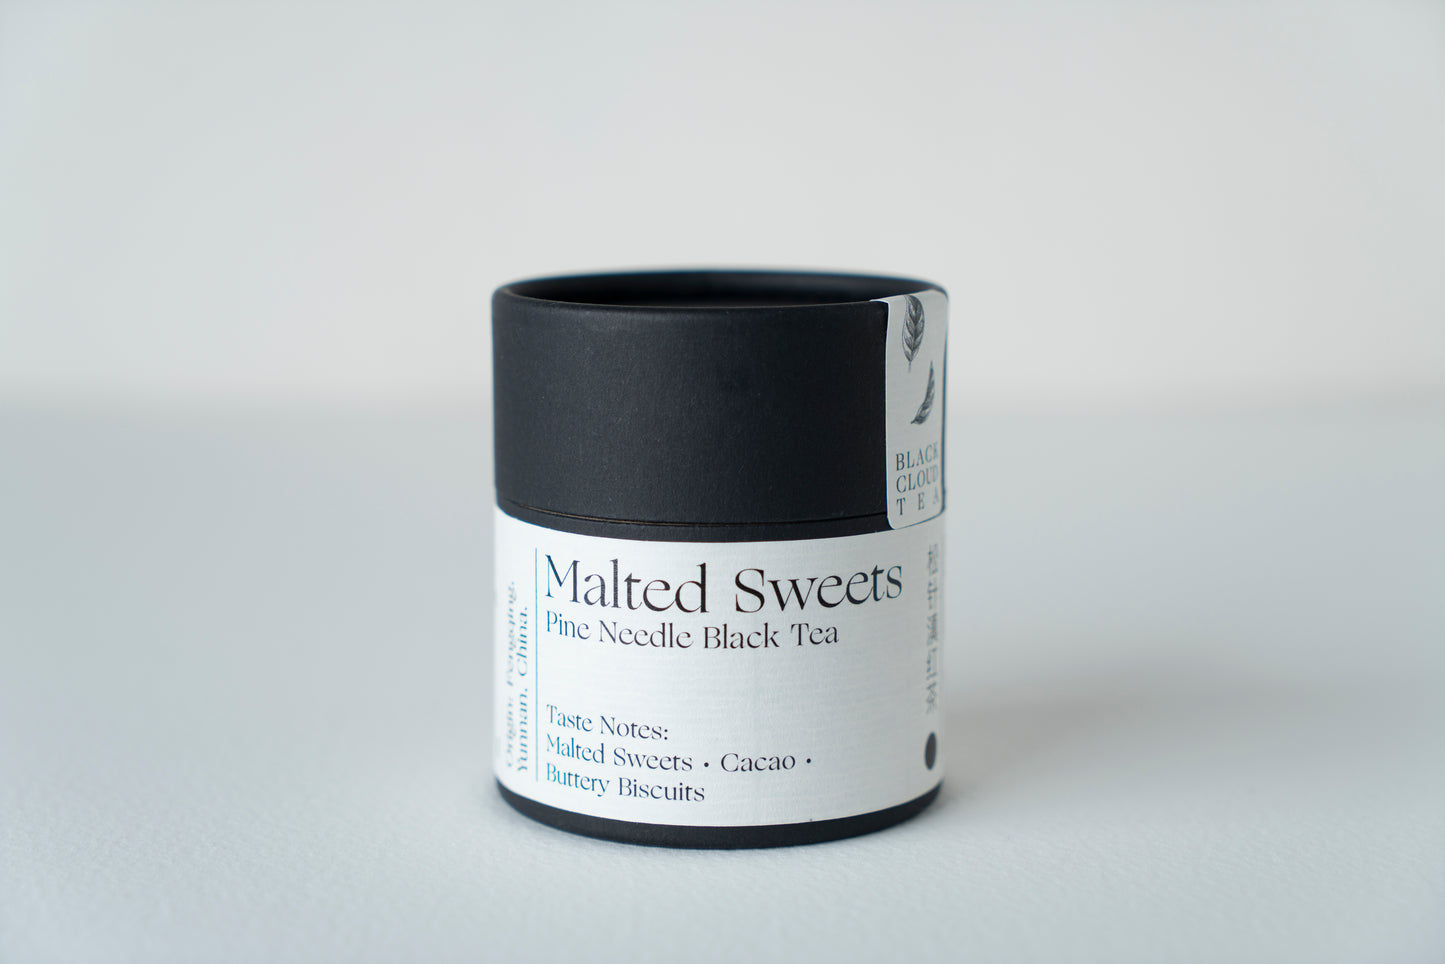 Malted Sweets